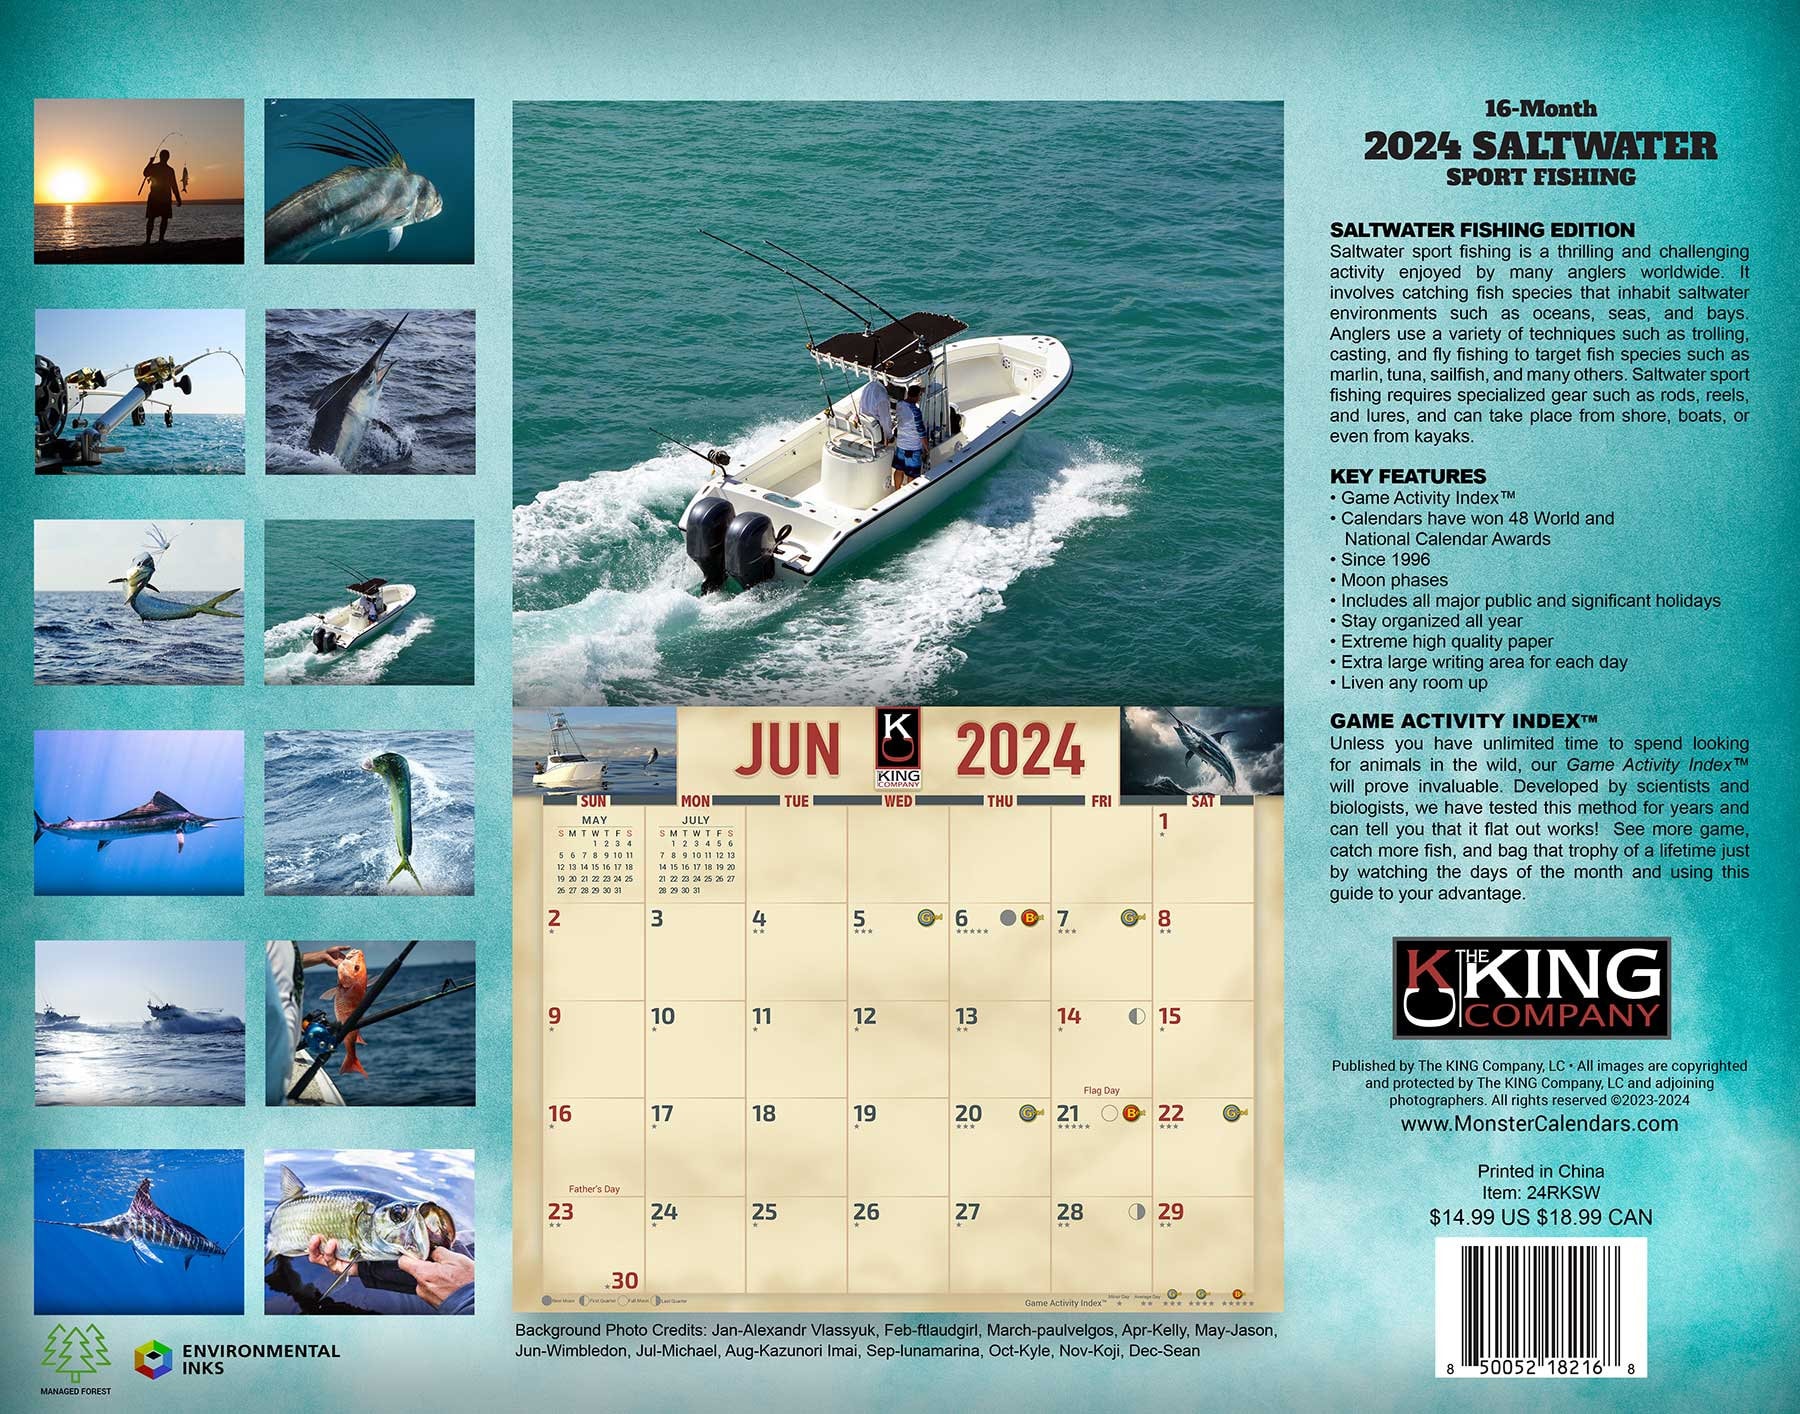 2024 Saltwater Fishing Wall Calendar 16-month X-large Size 14x22, Best  Saltwater Sport Fish Calendar by the KING Company FREE SHIPPING -   Canada